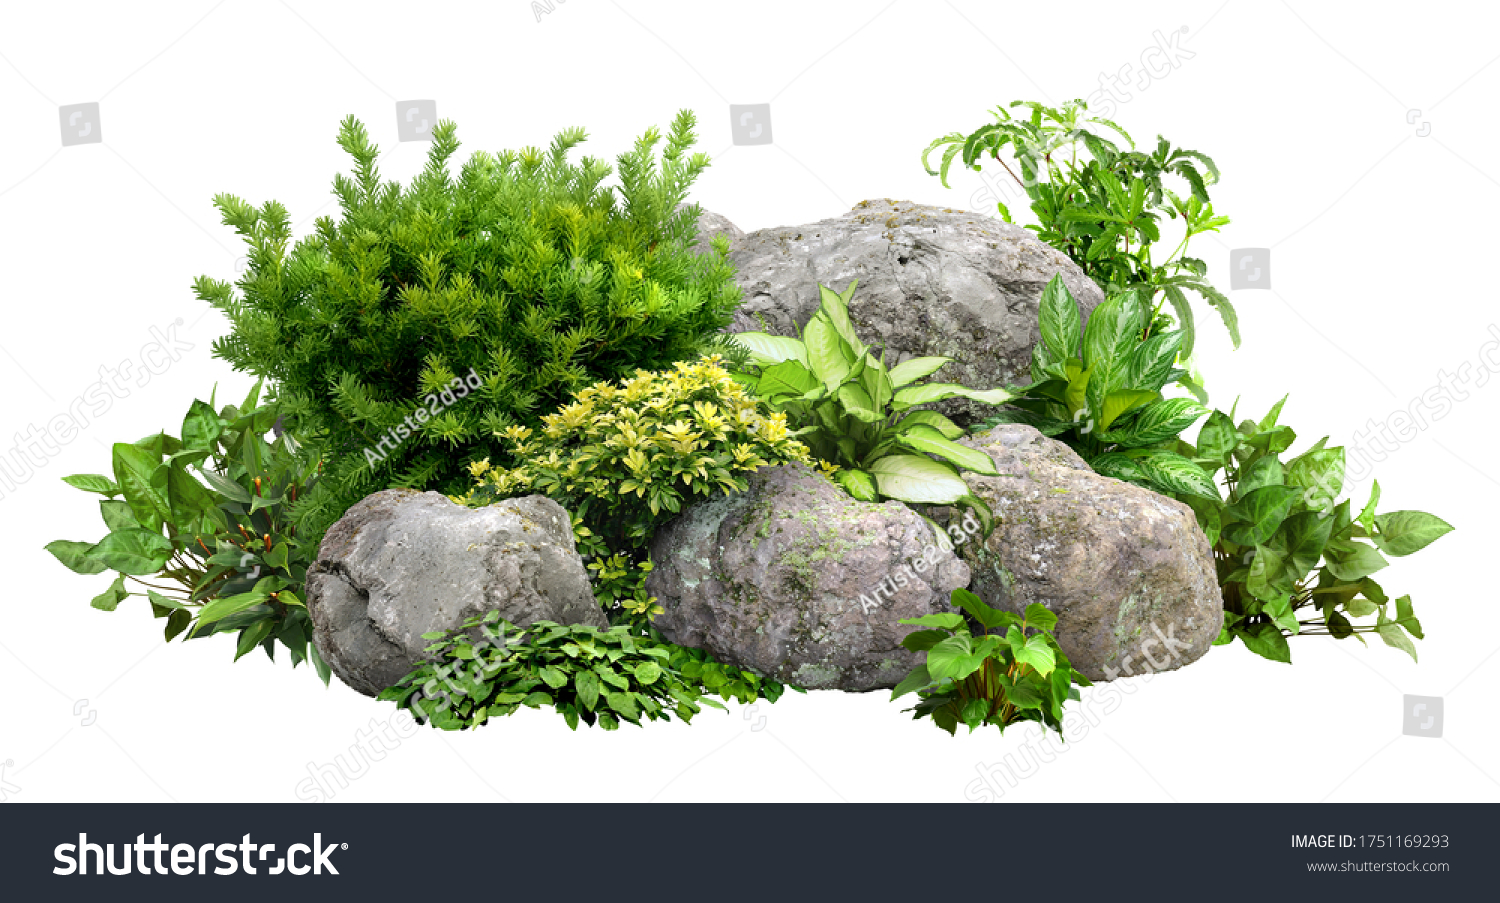 Cutout rock surrounded by flowers.
Garden design isolated on white background. Flowering shrub and green plants for landscaping. Decorative shrub and flower bed. #1751169293